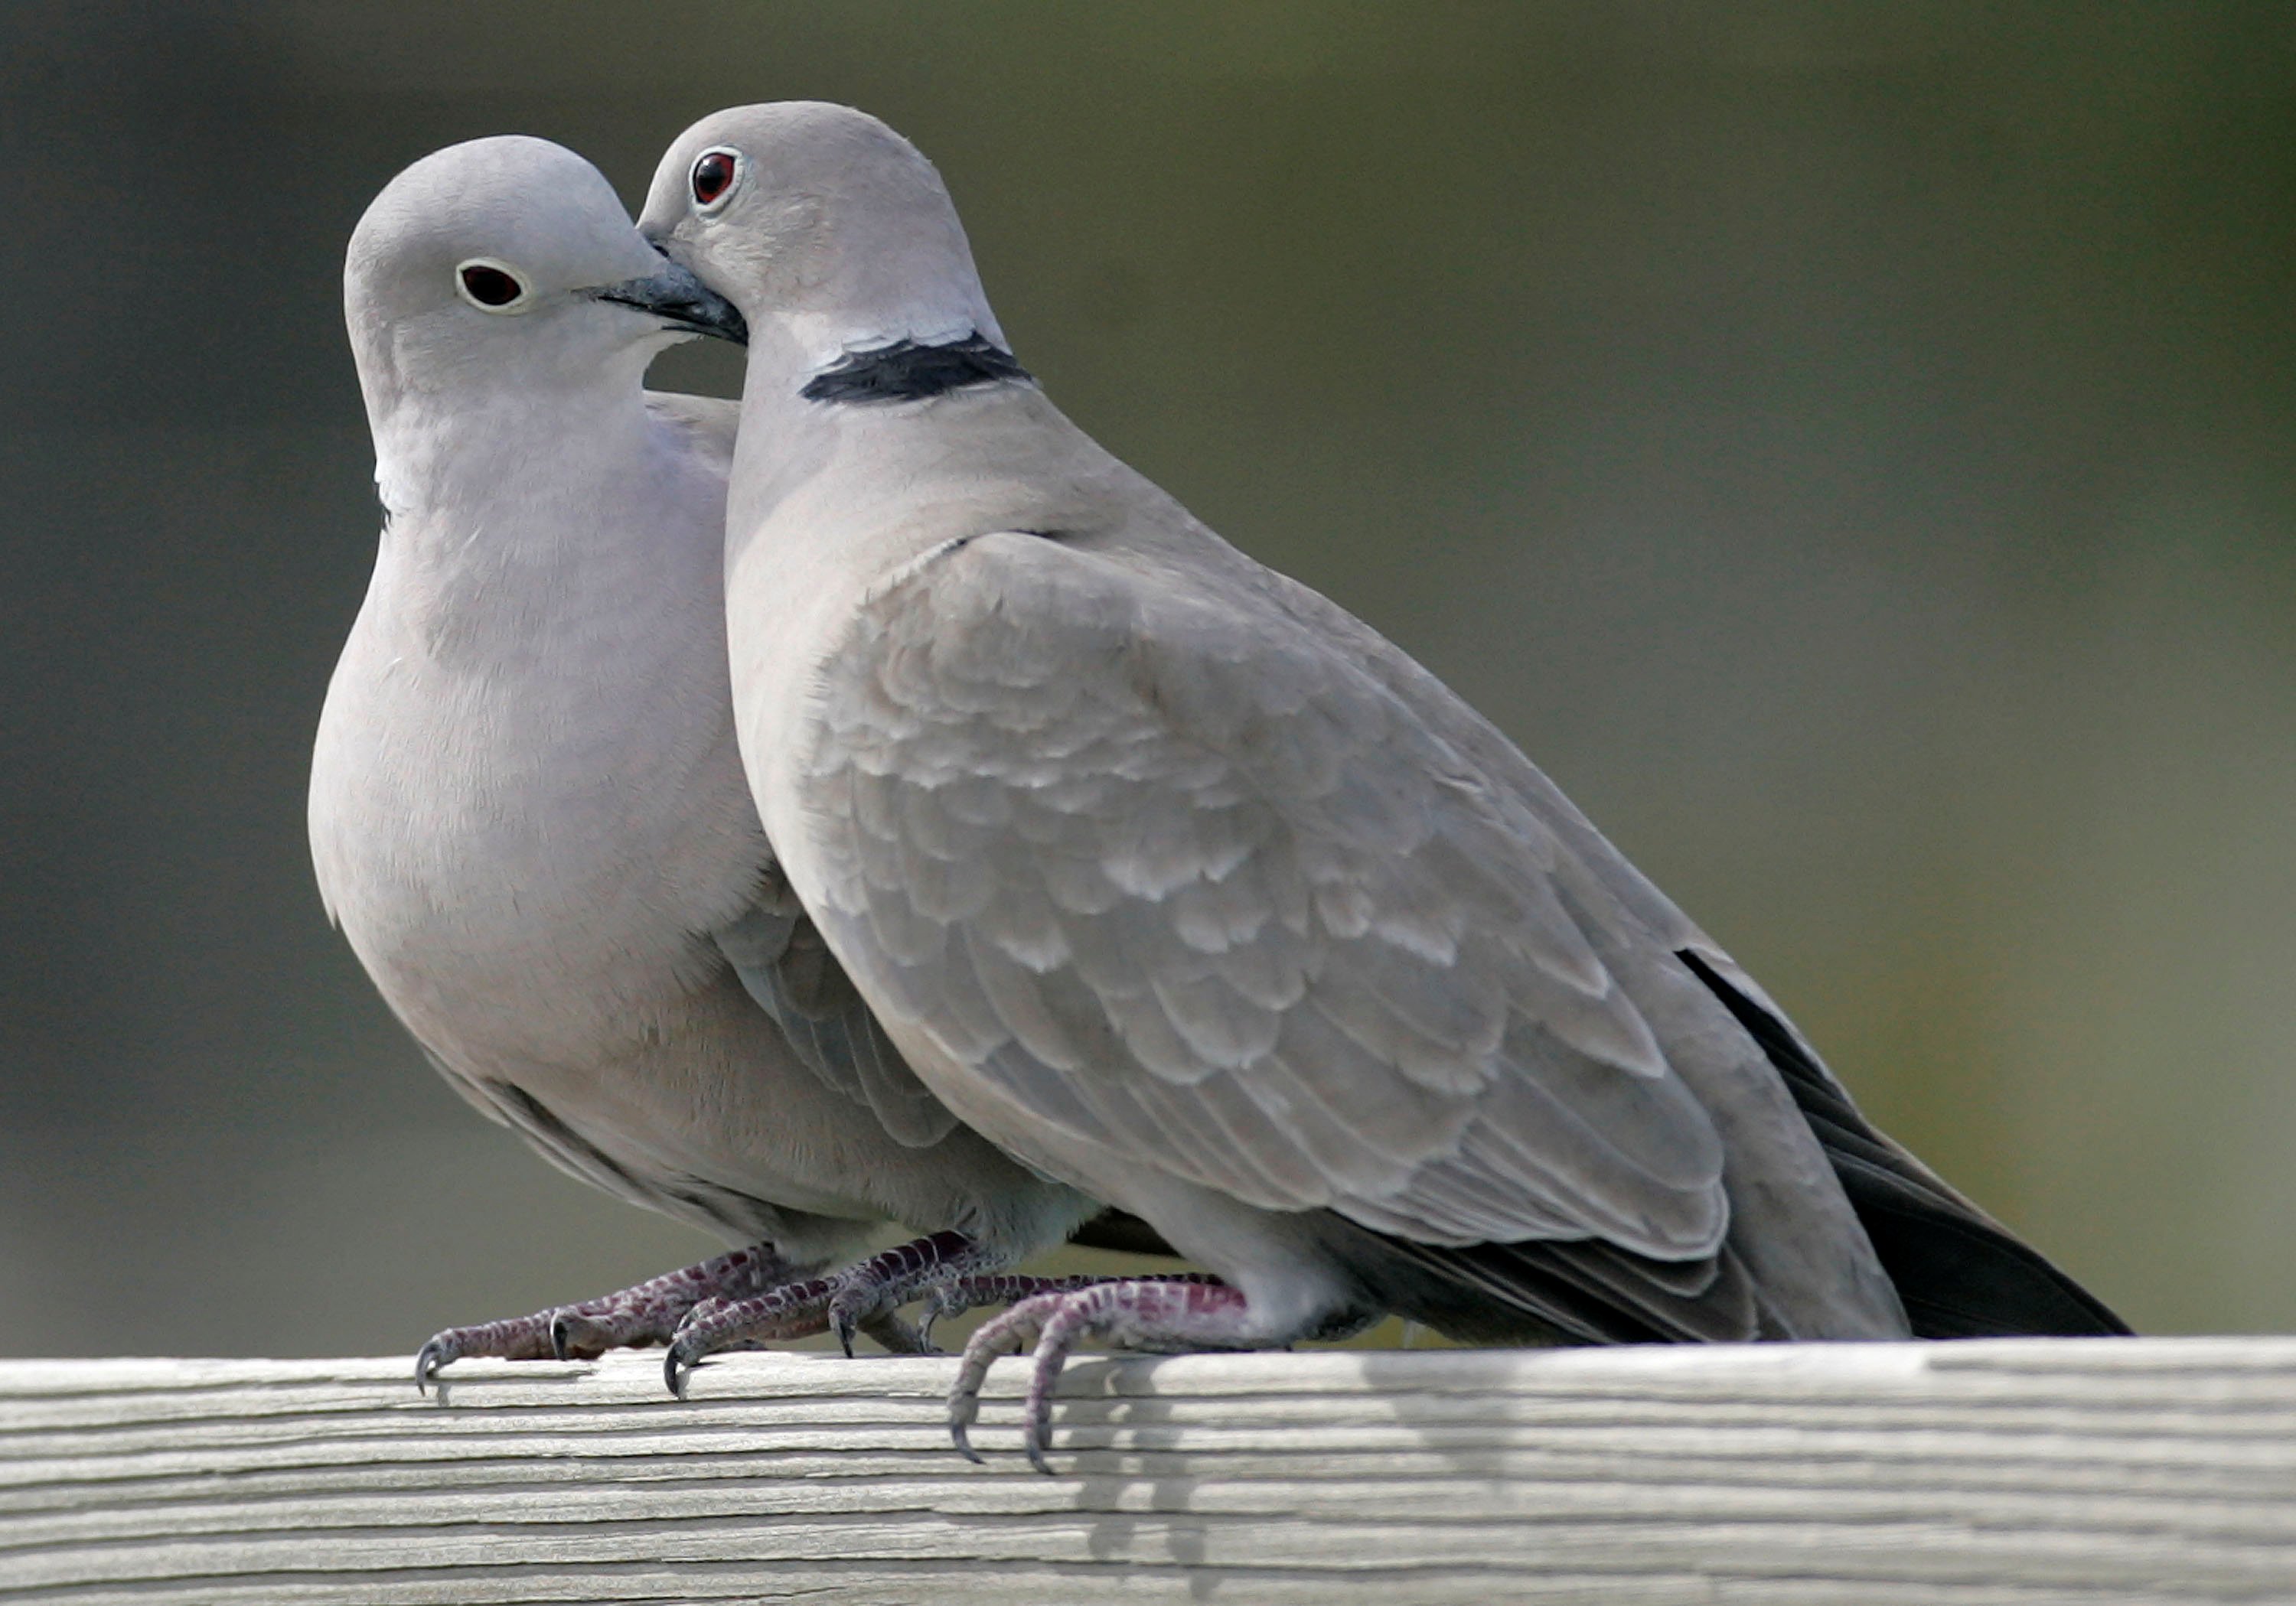 This photo shows two turtle doves in St. George Island, Fla. on Feb. 12, 2009. (Phil Coale—AP)